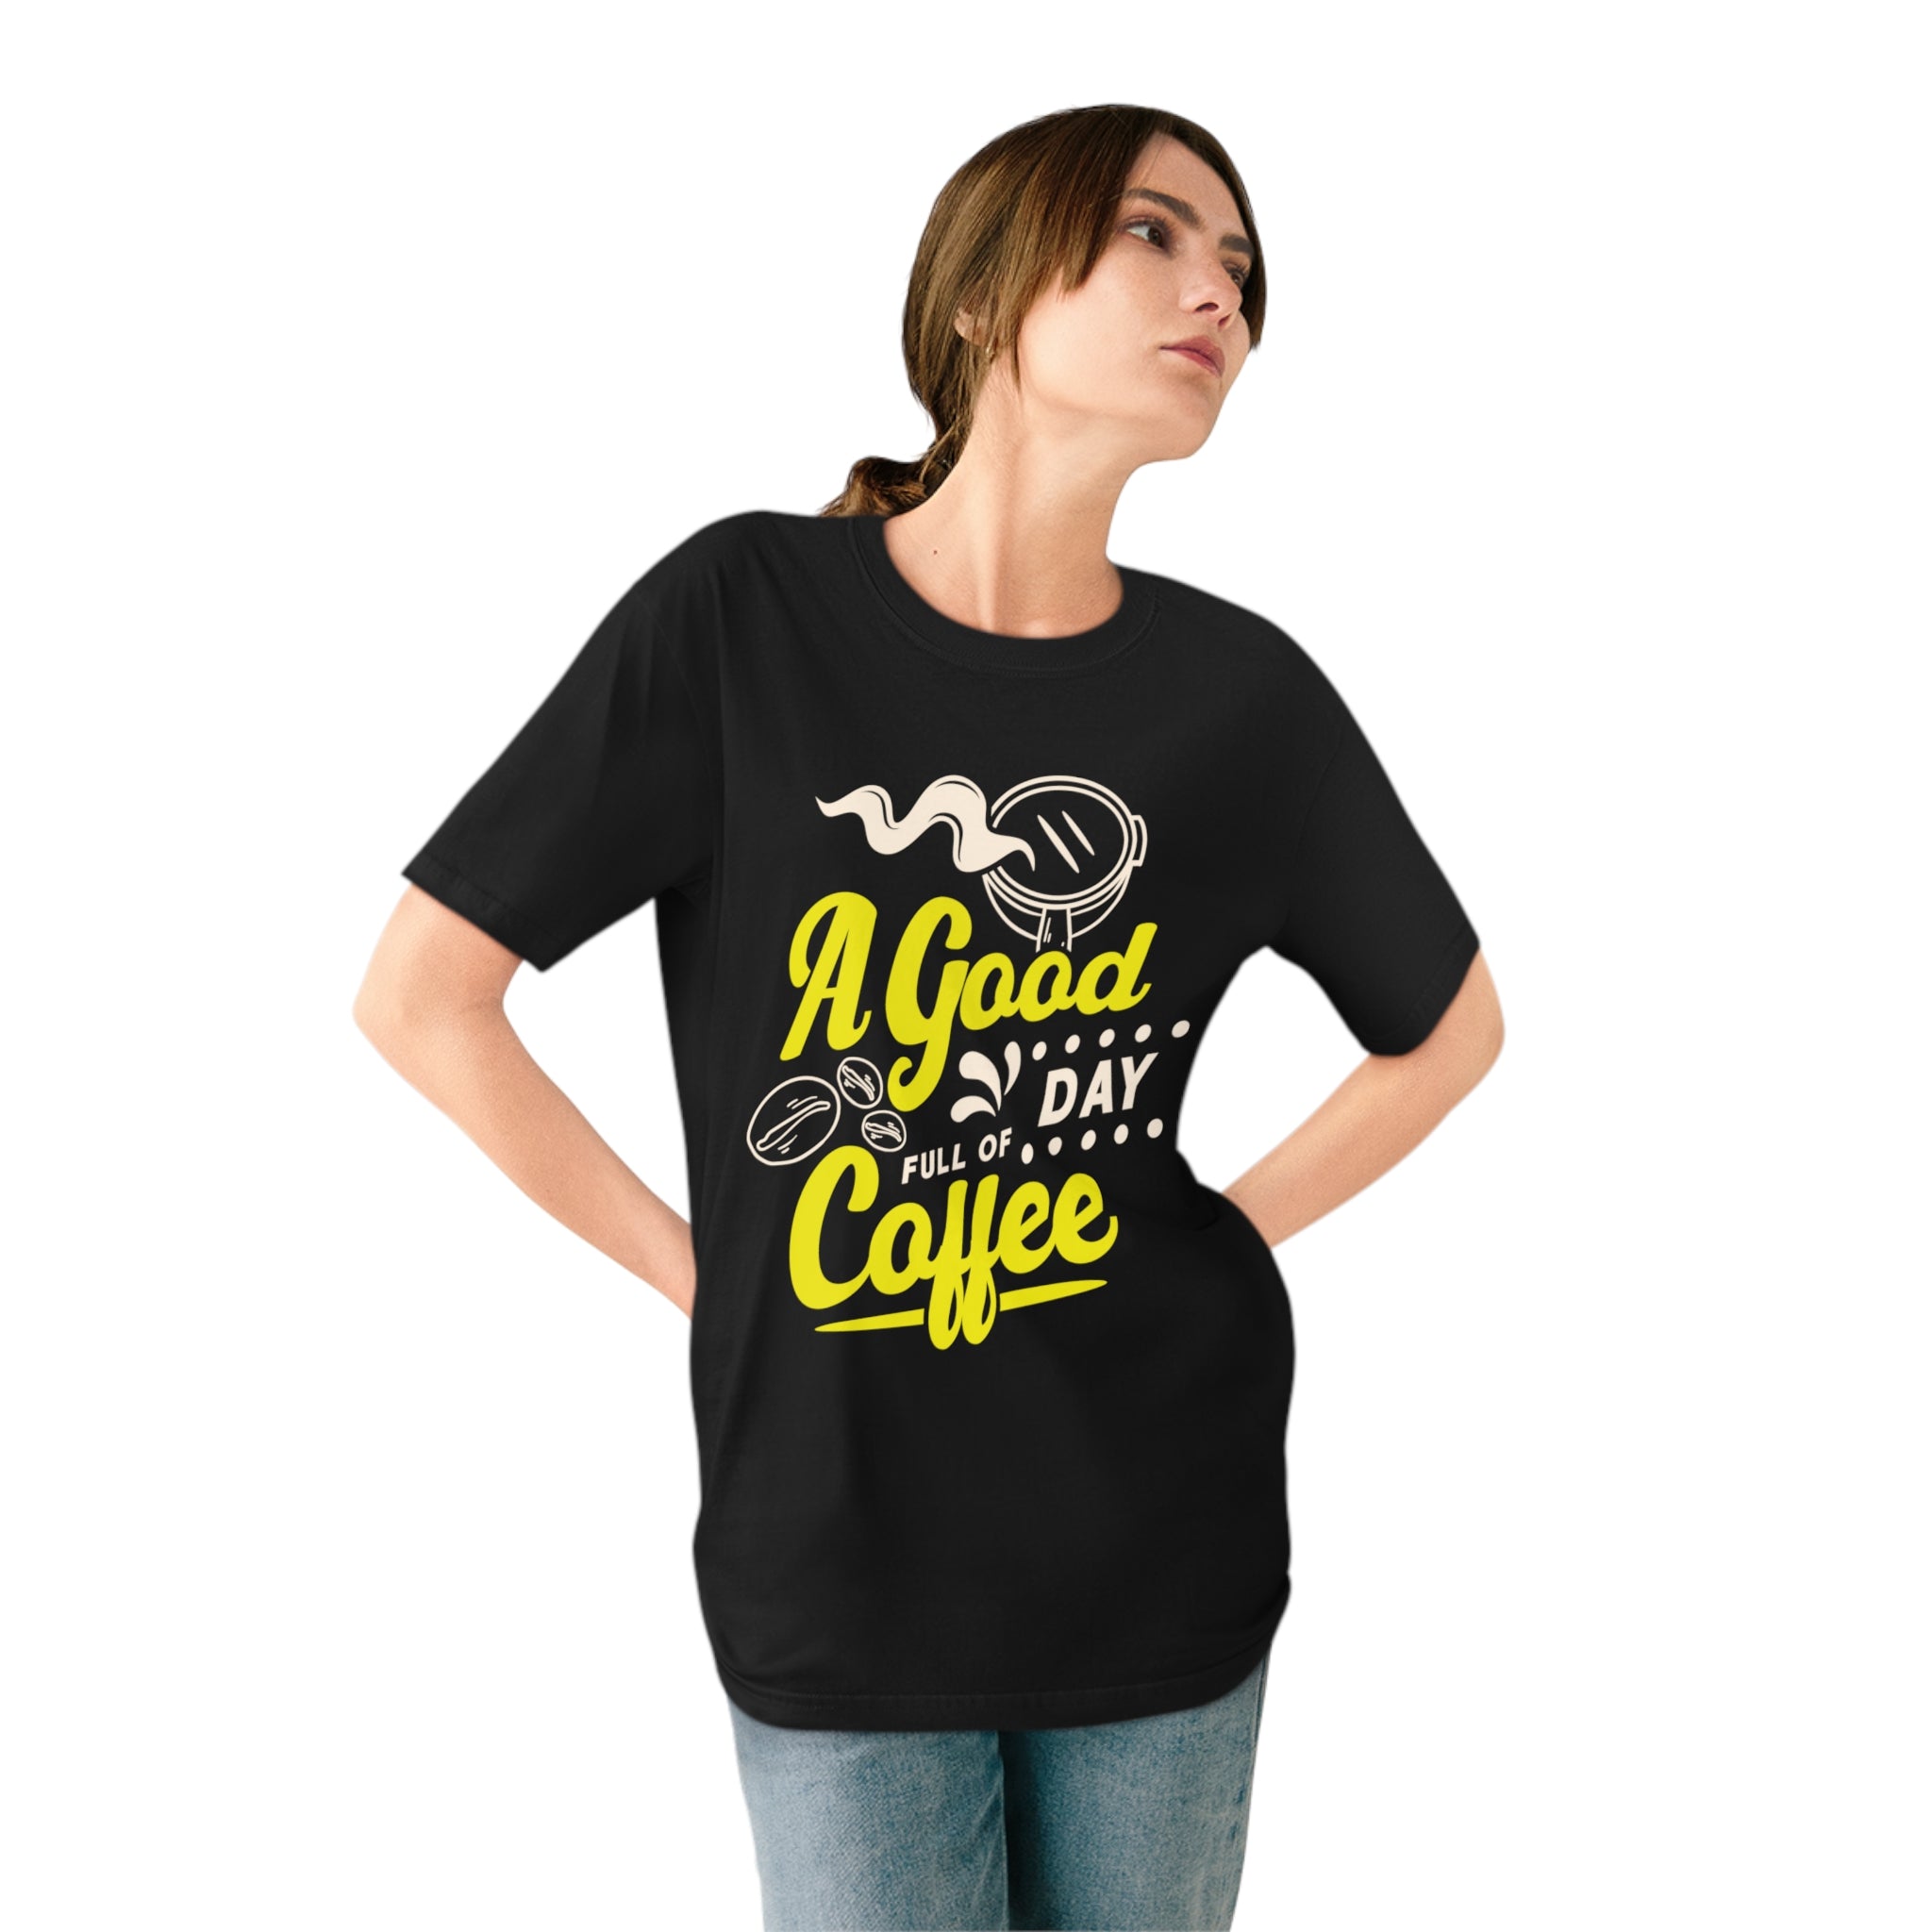 A Good Day Full of Coffee, T-shirt